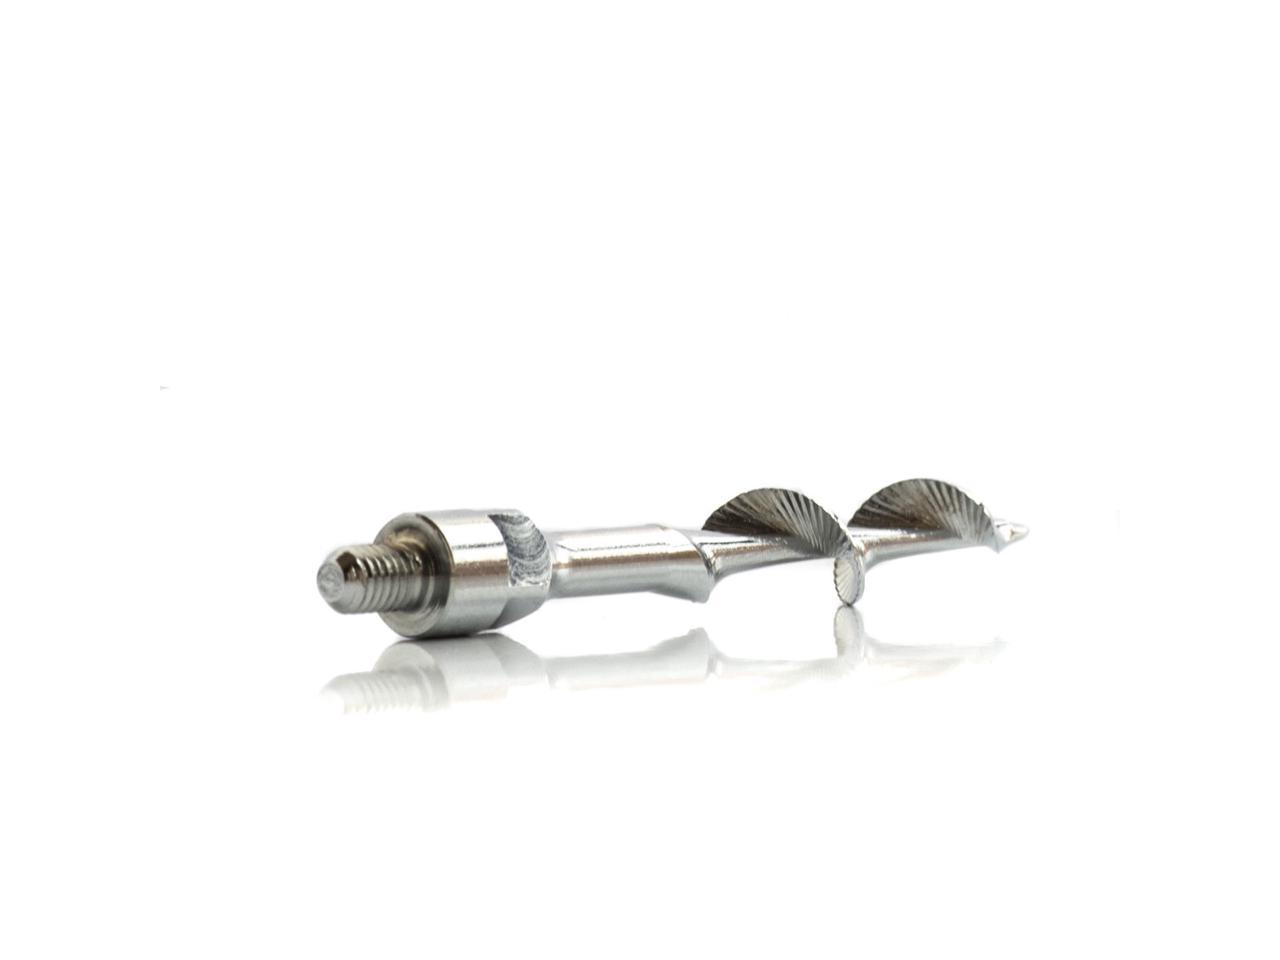 Set of 3 Male Worms KRN for BOJ Wall-mounted Corkscrew for any Type of Corks